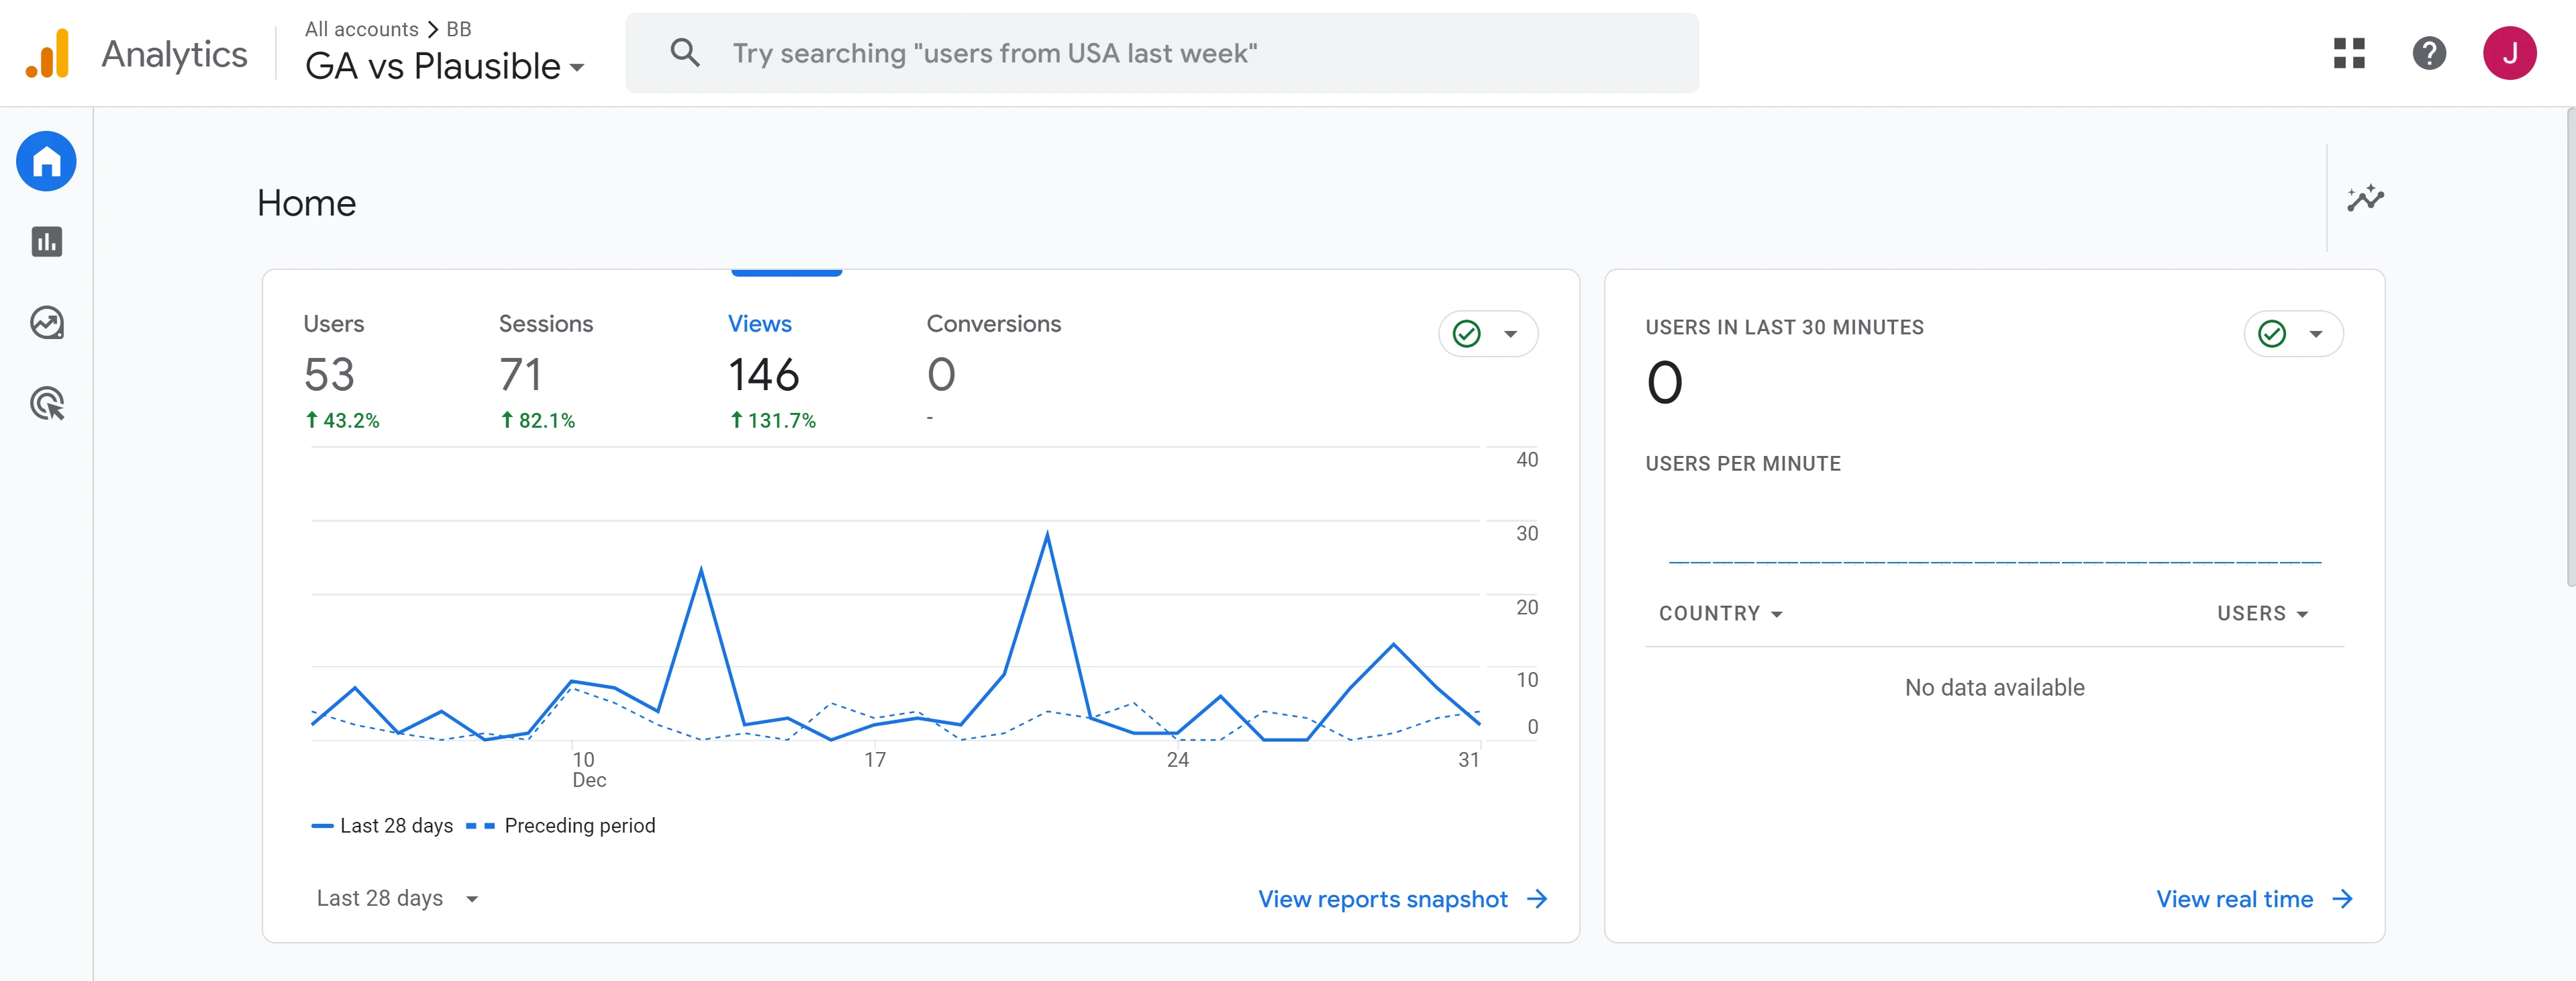 Google Analytics home screen showing a minimalist line graph of users, sessions, views, and conversions